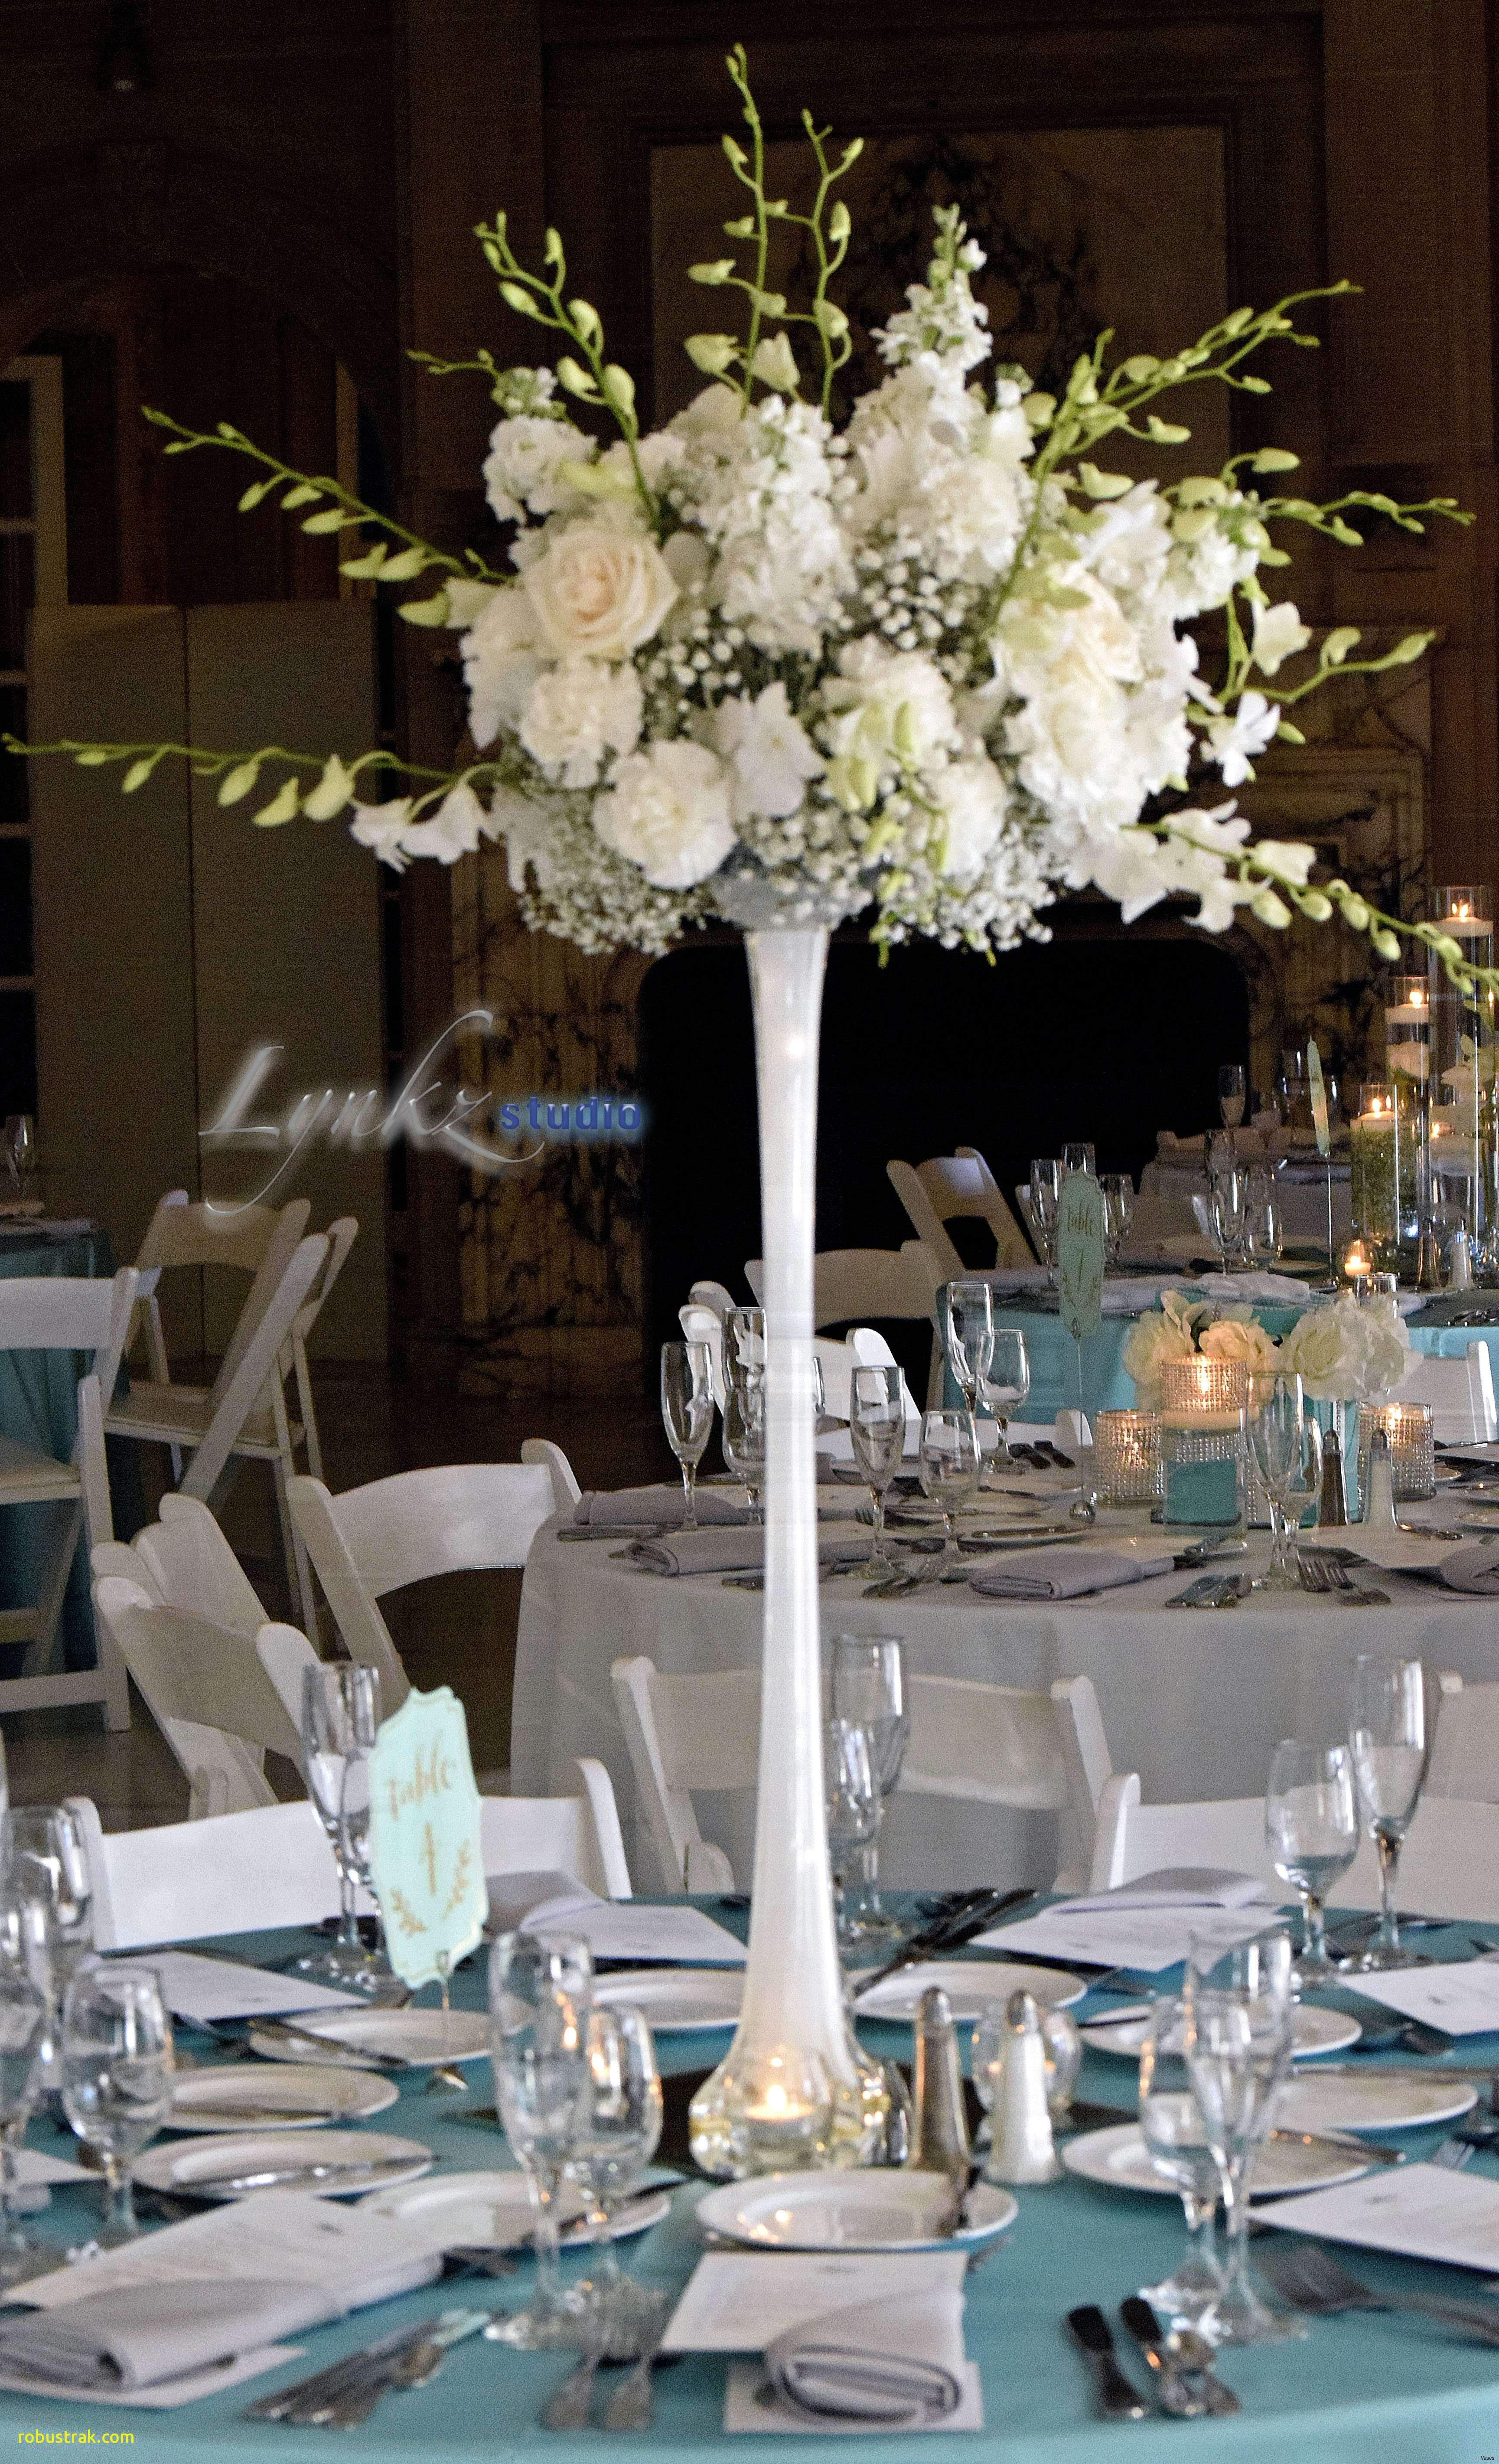 17 Stylish Light Blue and White Vase 2024 free download light blue and white vase of new nighttime wedding decorations home design ideas pertaining to vases eiffel tower vase lights hydrangea with grass vasei 0d scheme design ideas light decorati